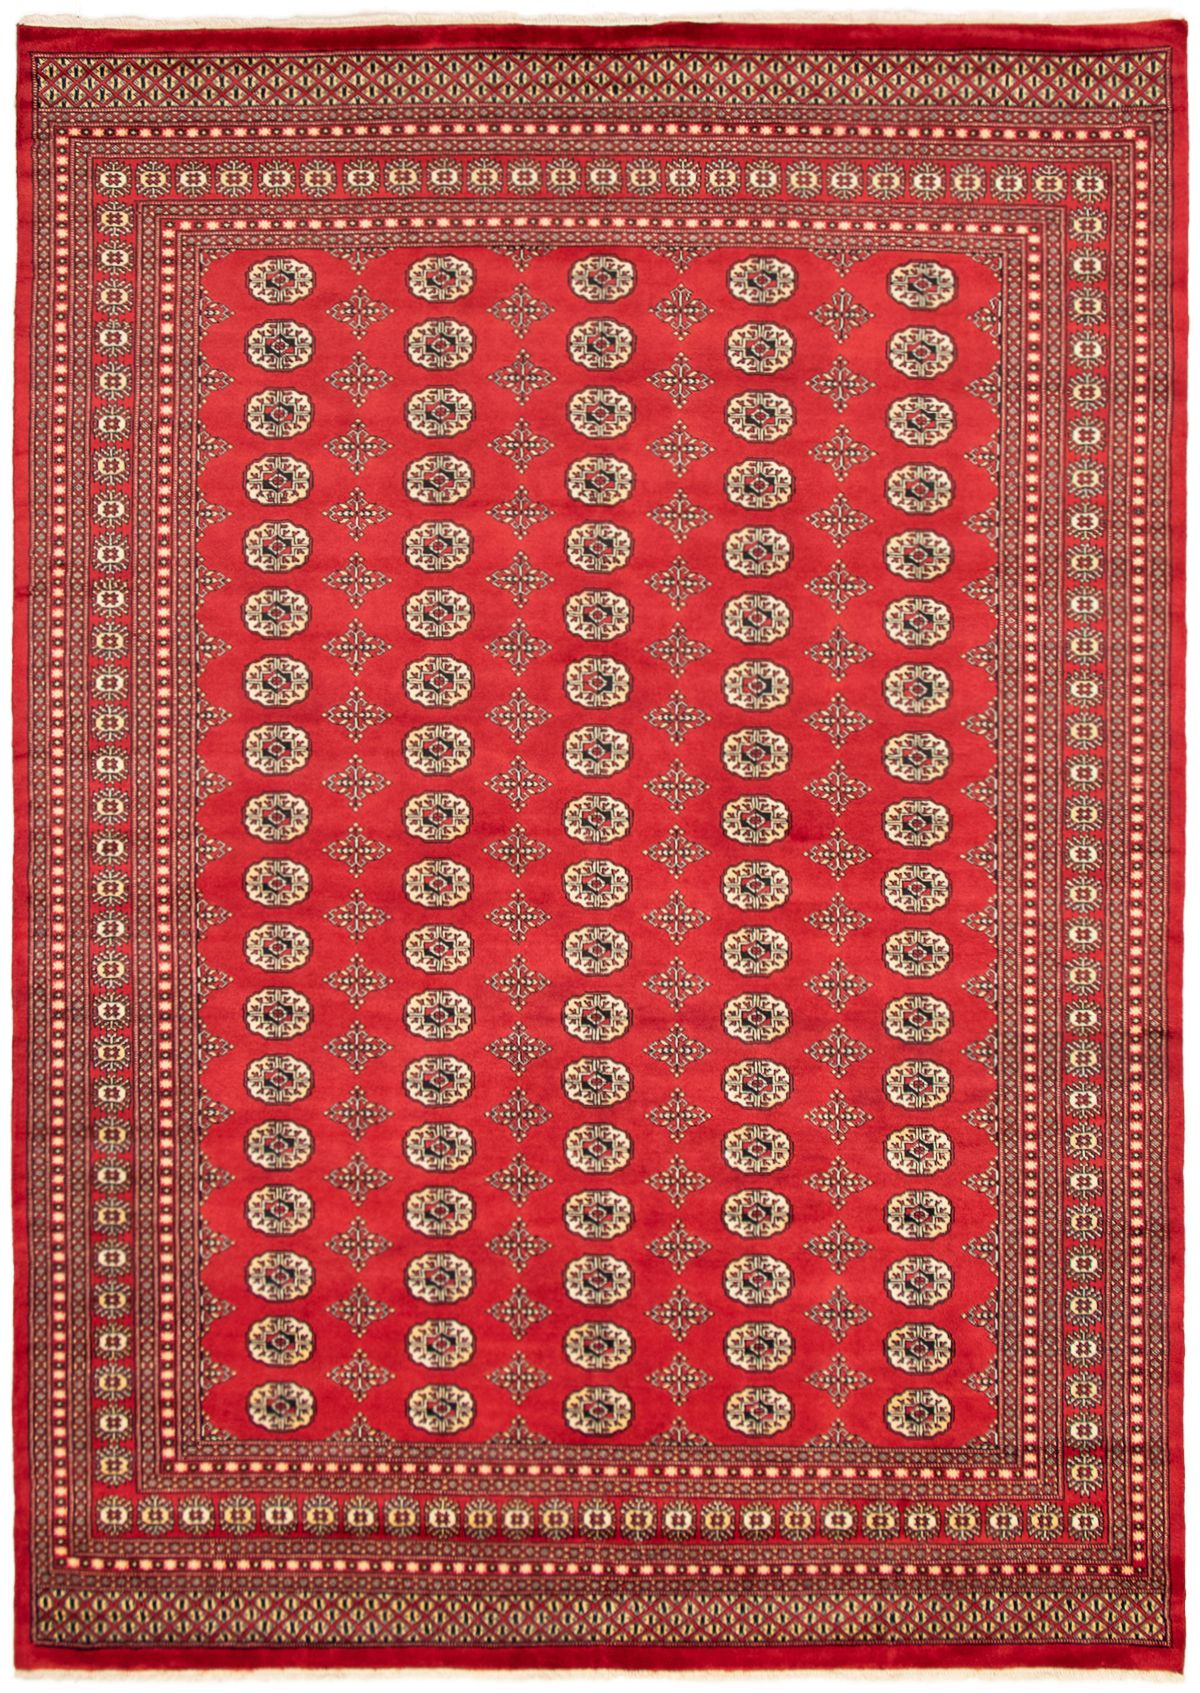 Hand-knotted Finest Peshawar Bokhara Red Wool Rug 8'1" x 11'4" Size: 8'1" x 11'4"  